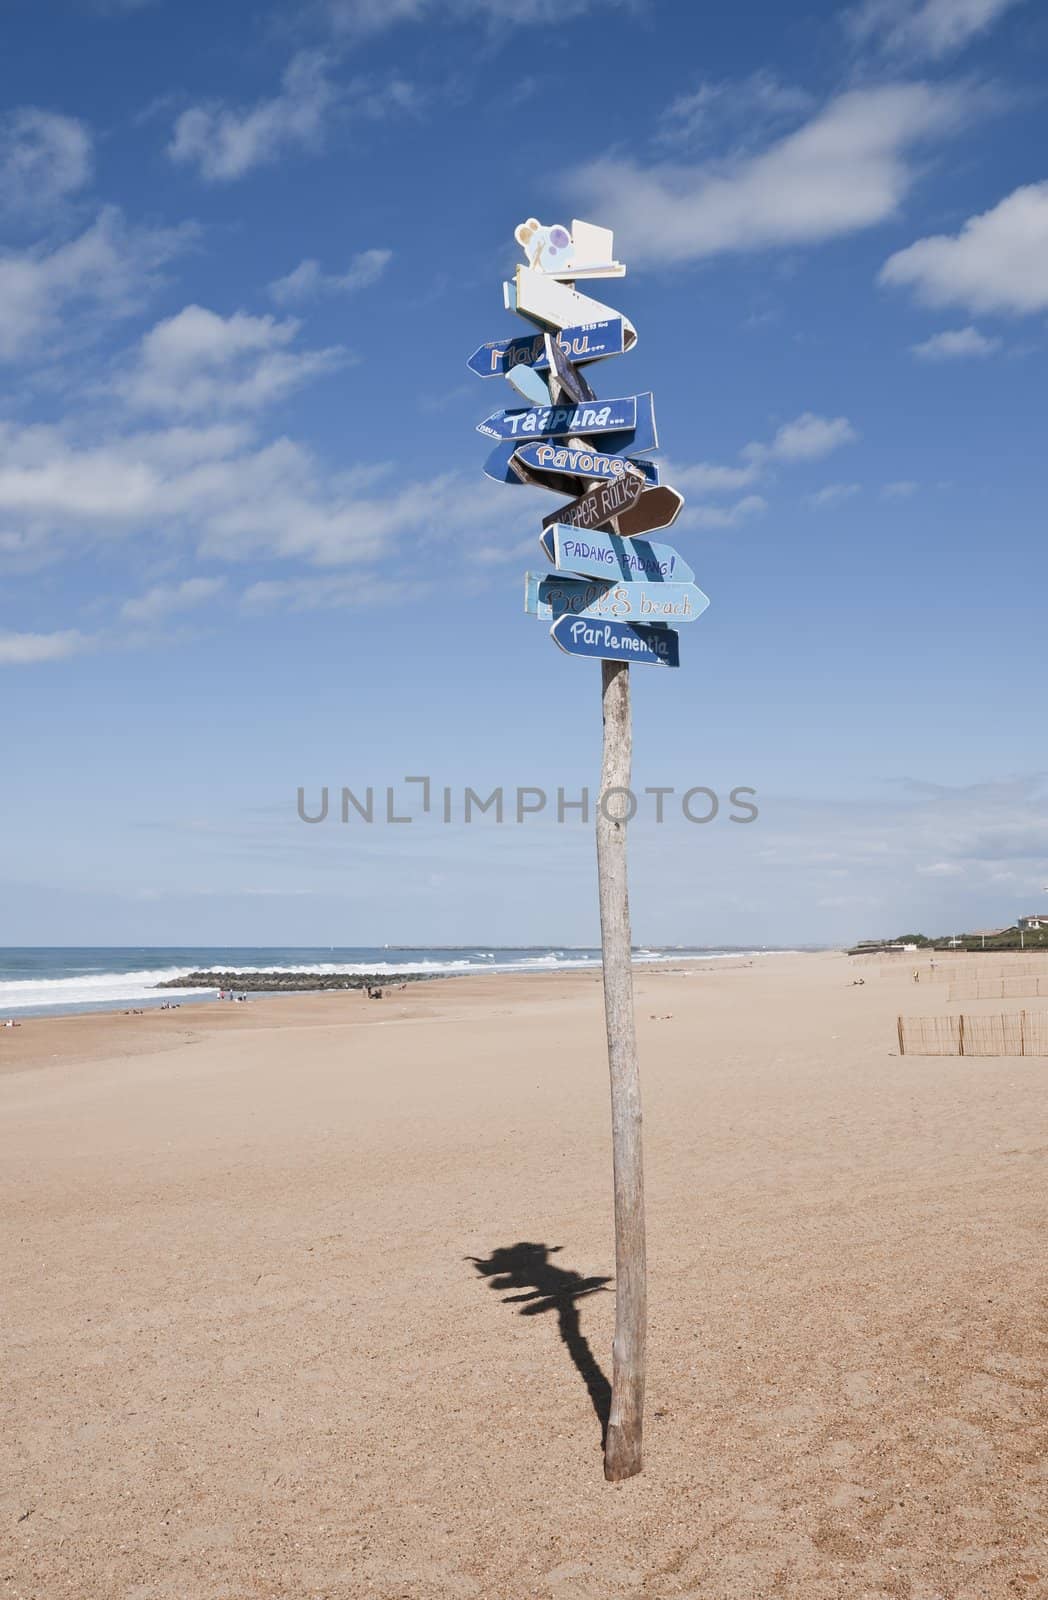 Lot of signs in only one roadsign to the world surf spots on a beach with a blue sky